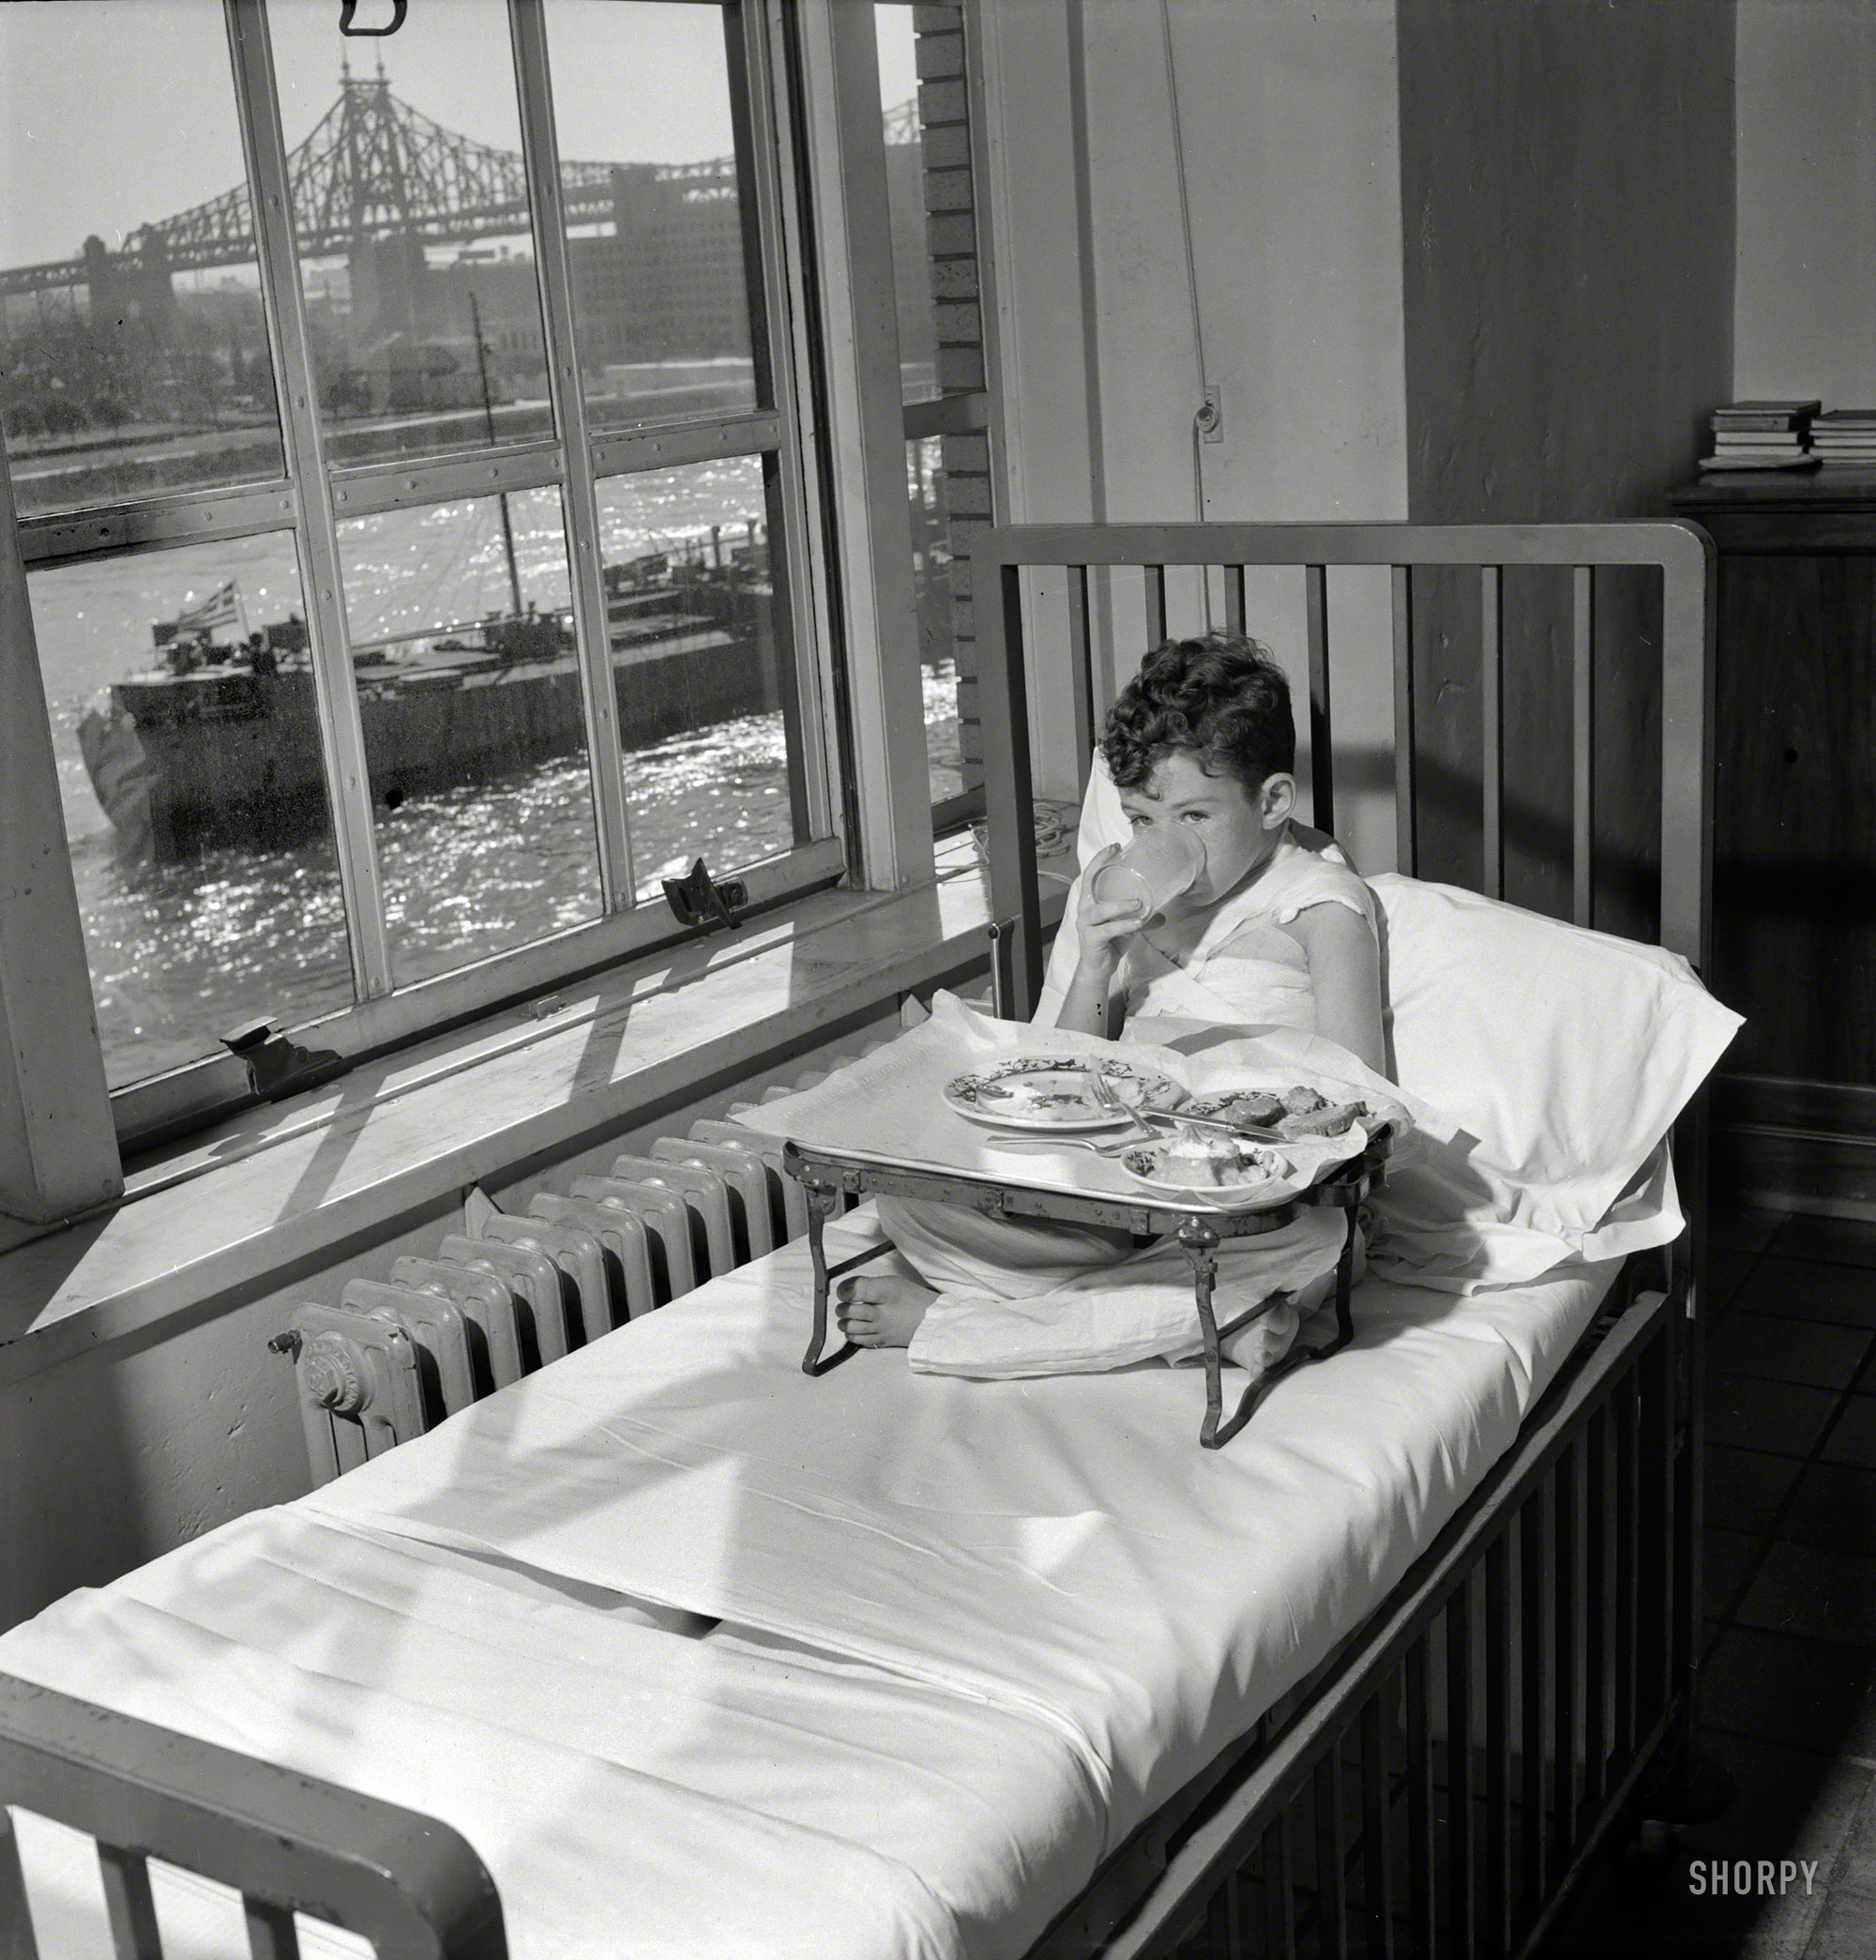 November 1942. "Babies' Hospital, New York. The welfare of this young patient, suffering from burns, is aided by having his bed placed near a window where he can watch the boats pass by. Nurses learn the importance of ministering the comforts of their patients in promoting recovery." Photo by Fritz Henle for the Office of War Information. View full size.